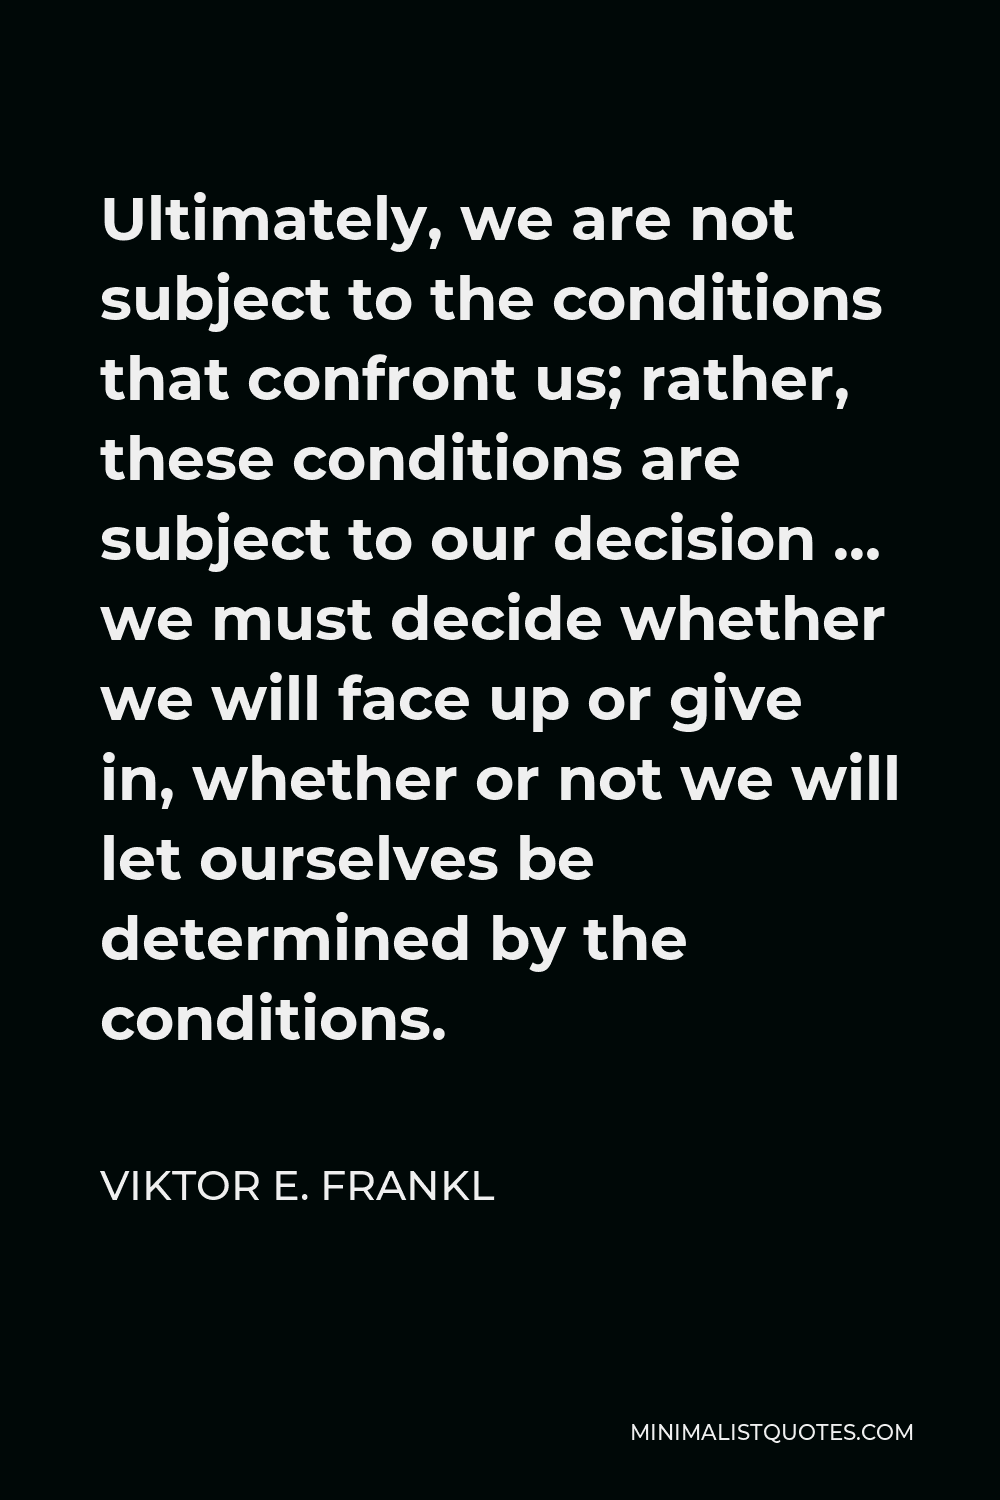 Viktor E. Frankl Quote - Ultimately, we are not subject to the conditions that confront us; rather, these conditions are subject to our decision … we must decide whether we will face up or give in, whether or not we will let ourselves be determined by the conditions.